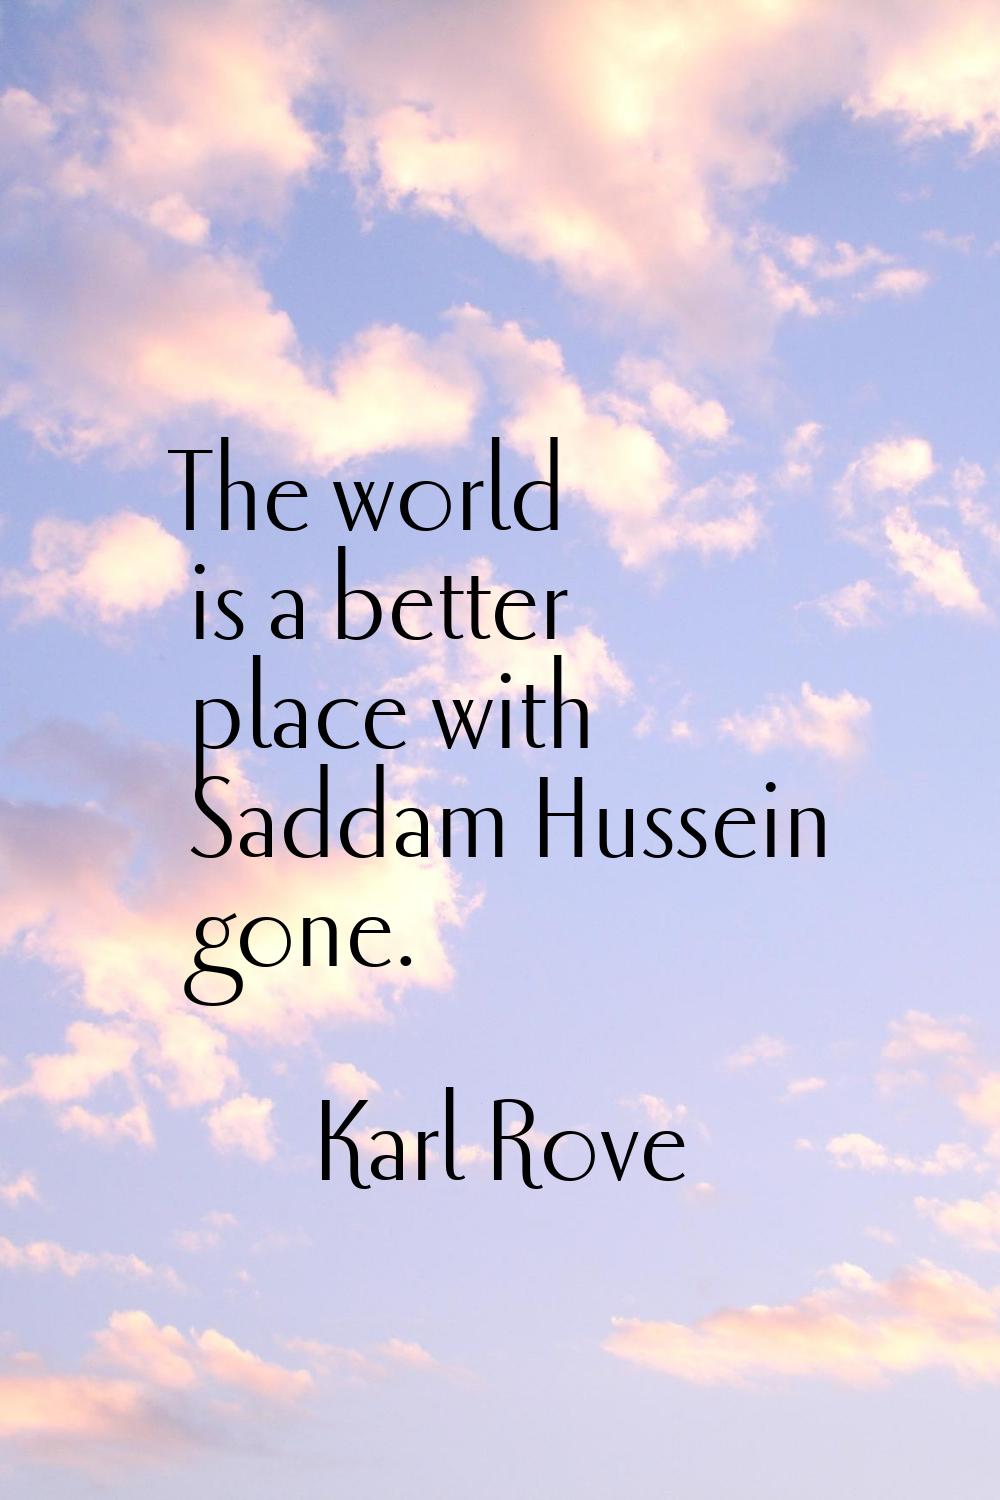 The world is a better place with Saddam Hussein gone.